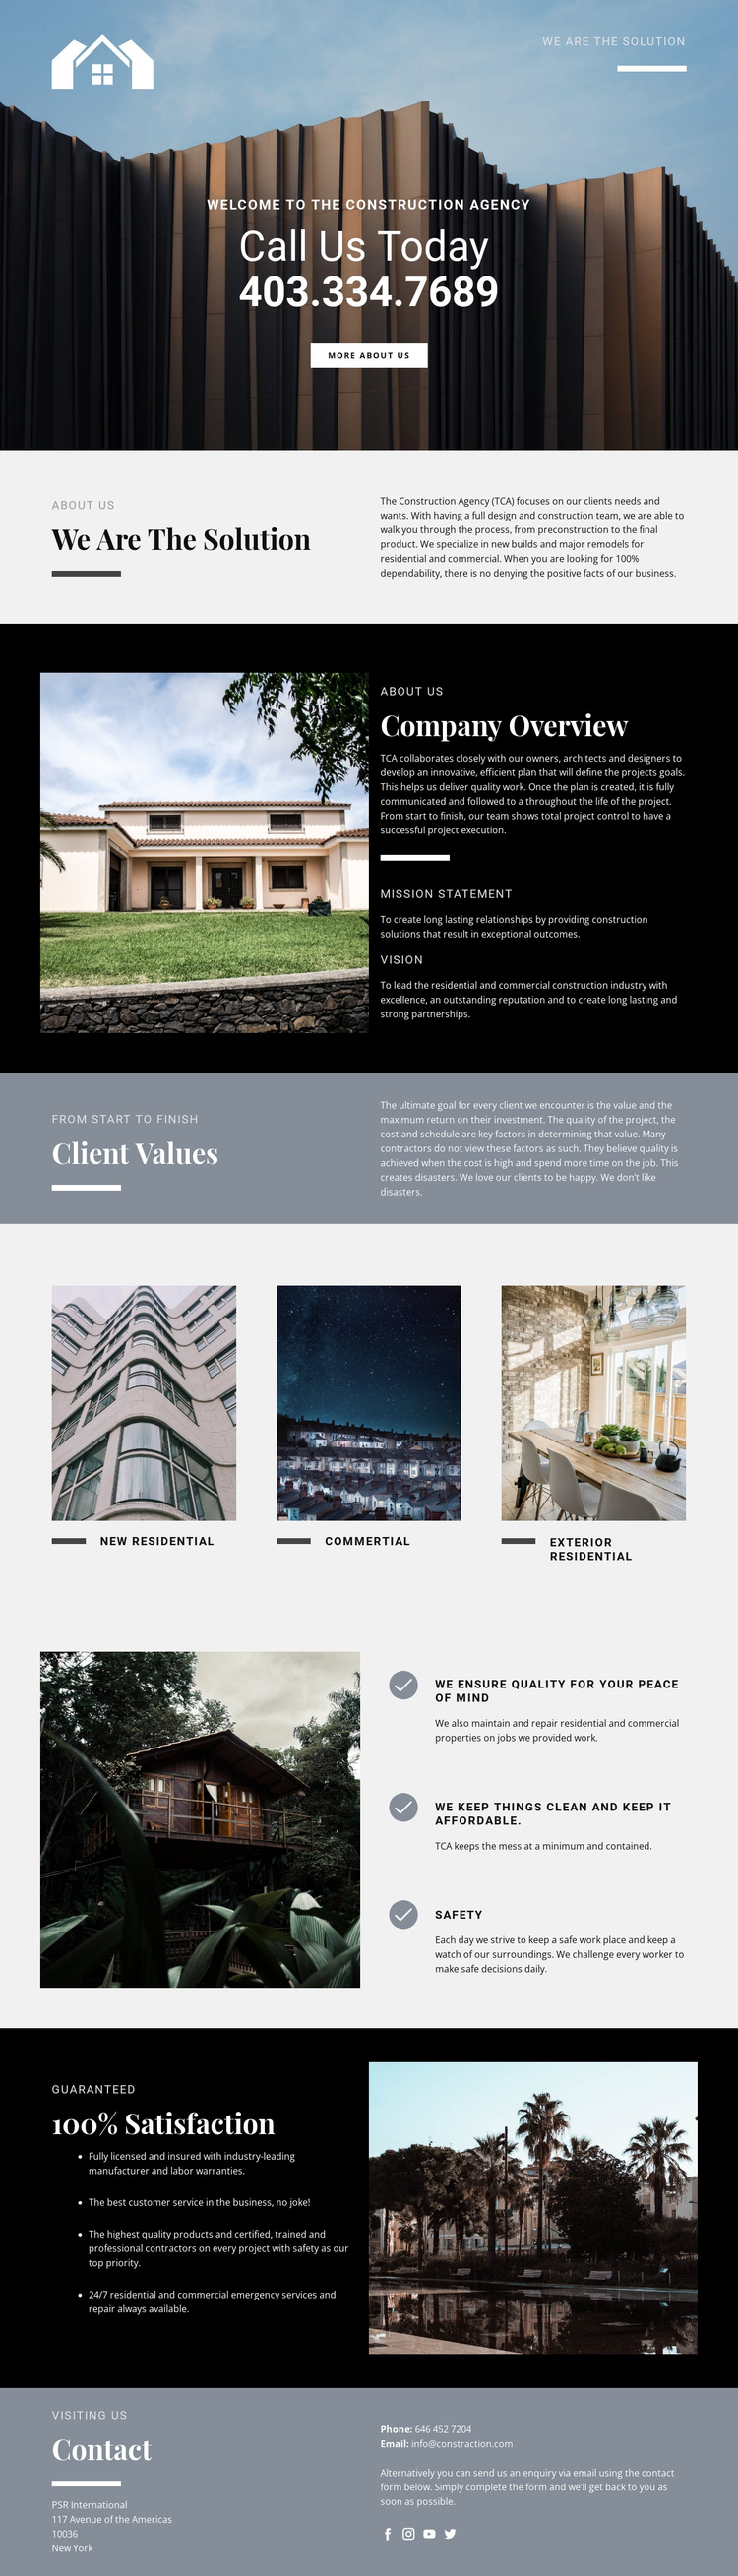 Joomla Real Estate Template from images01.nicepage.io